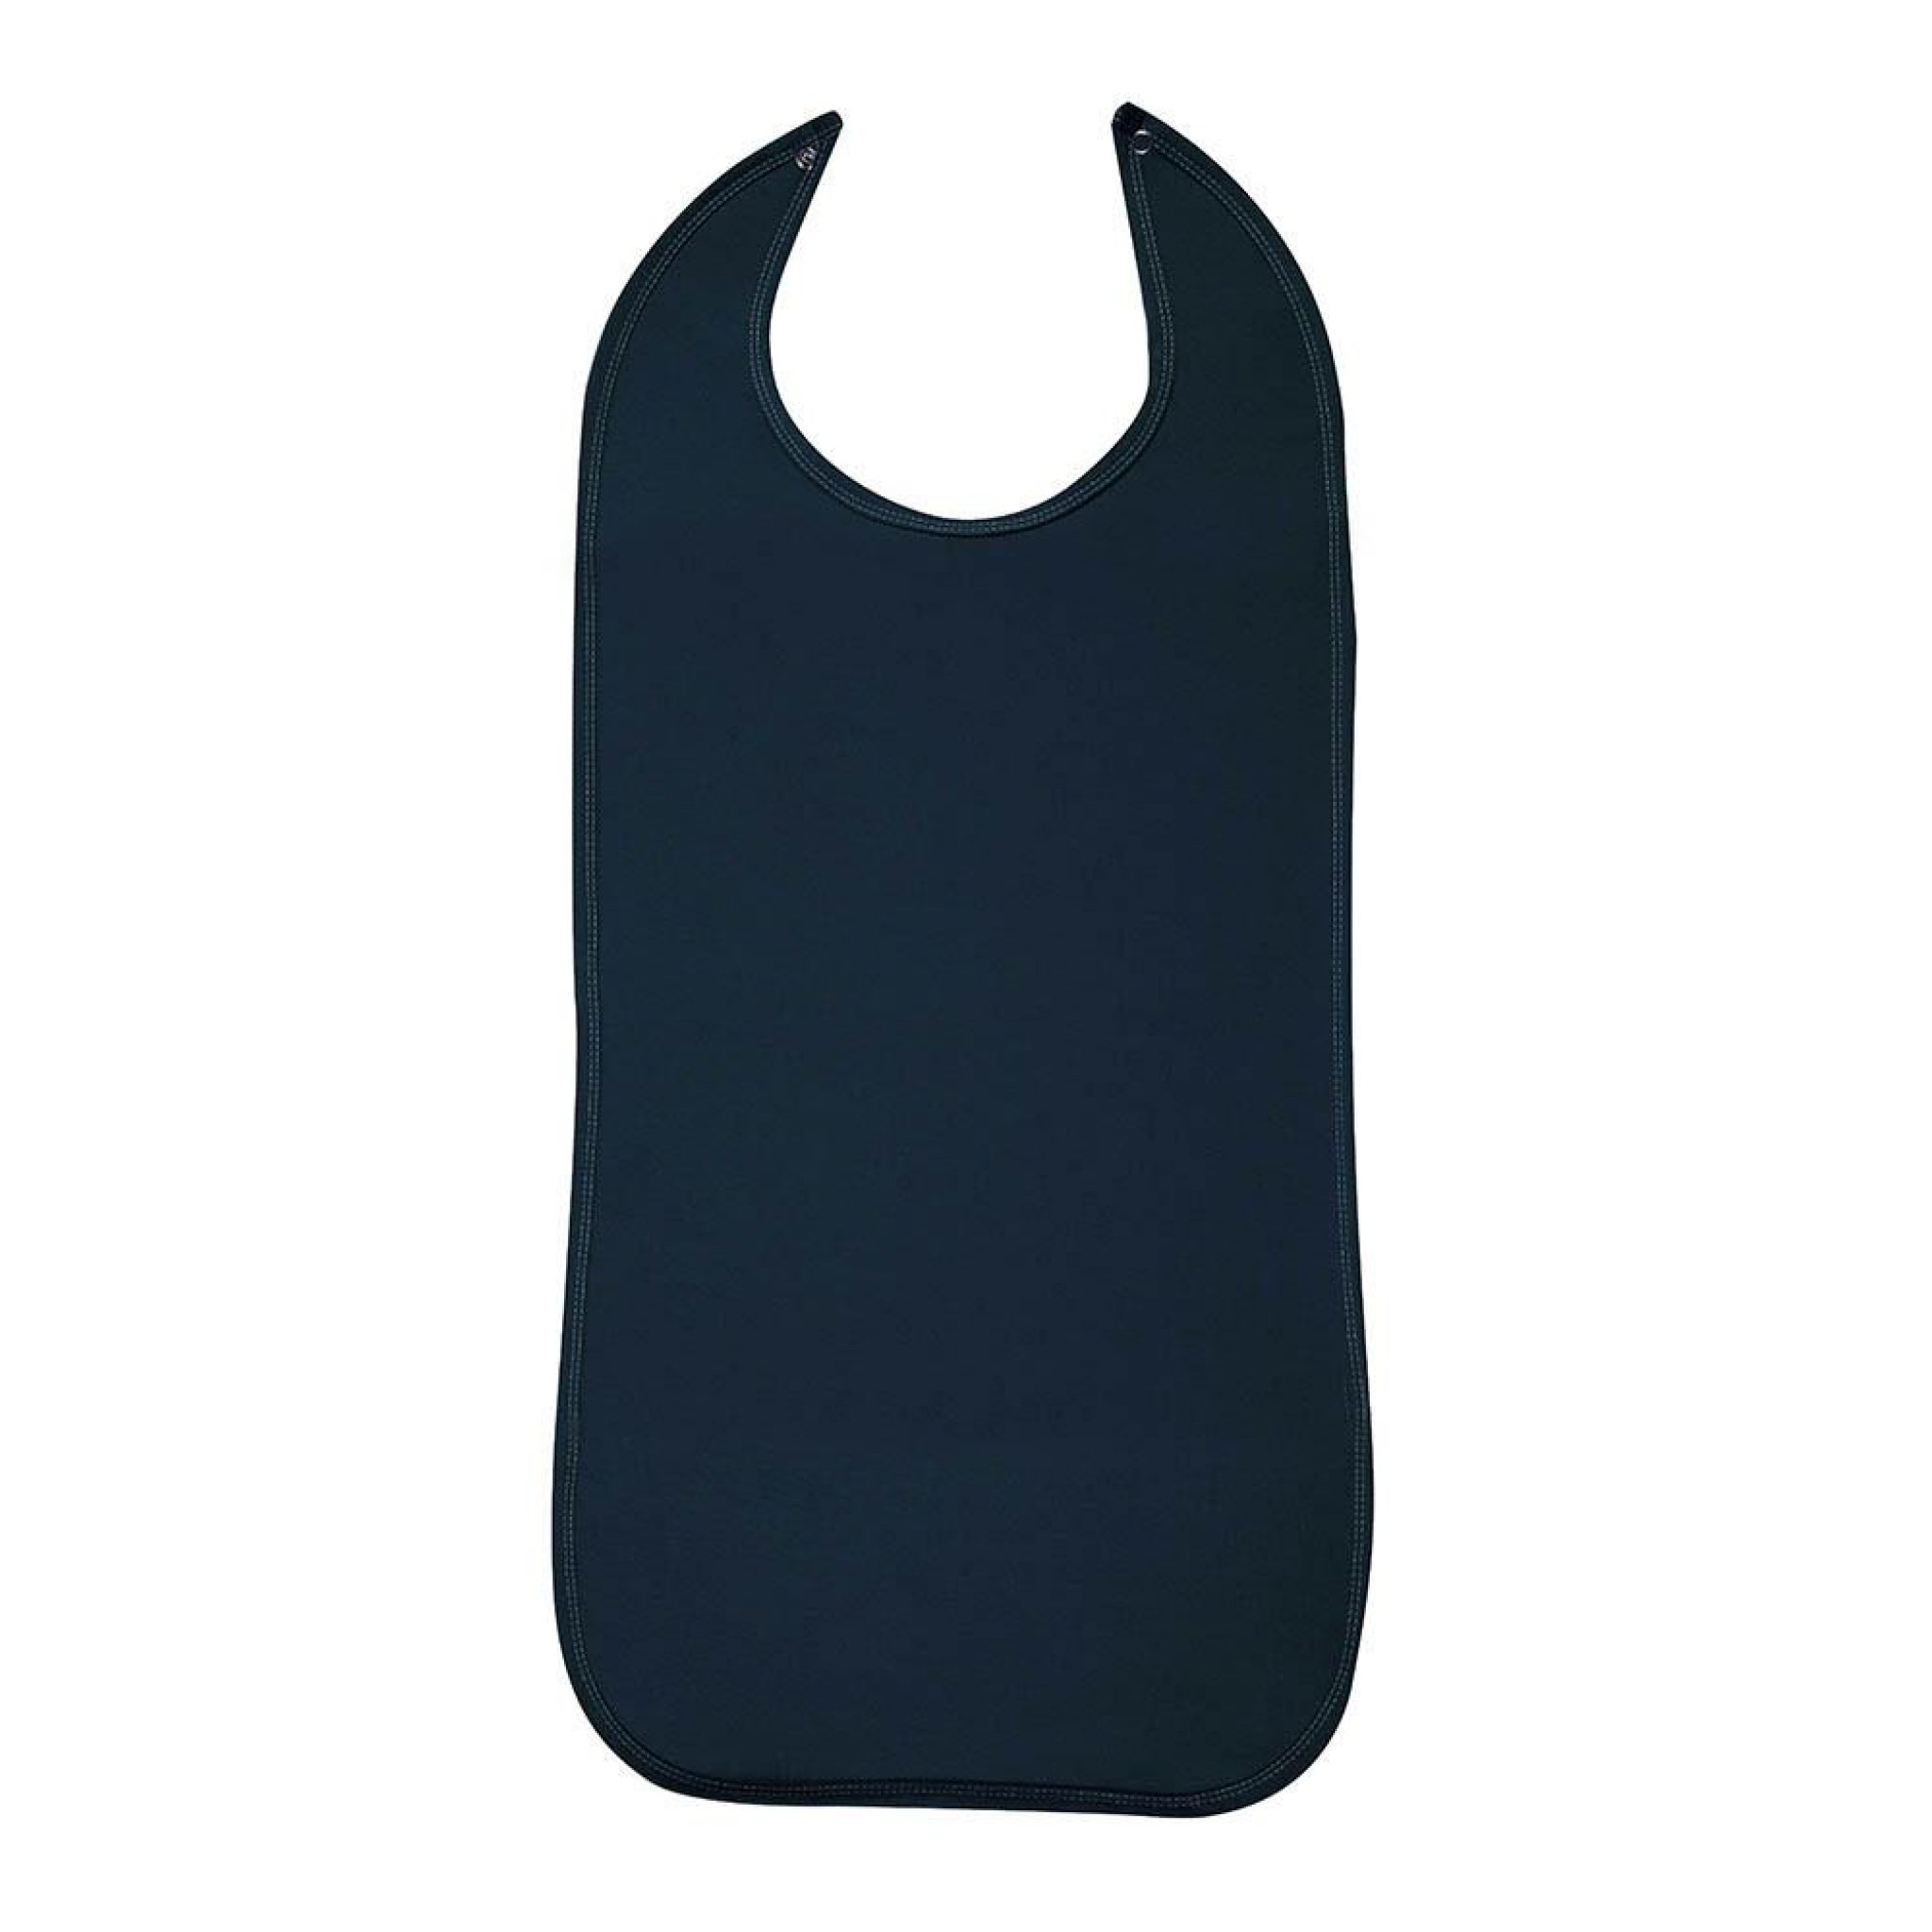 Clothing Protector Long with Press Stud Closure - Navy - GMobility